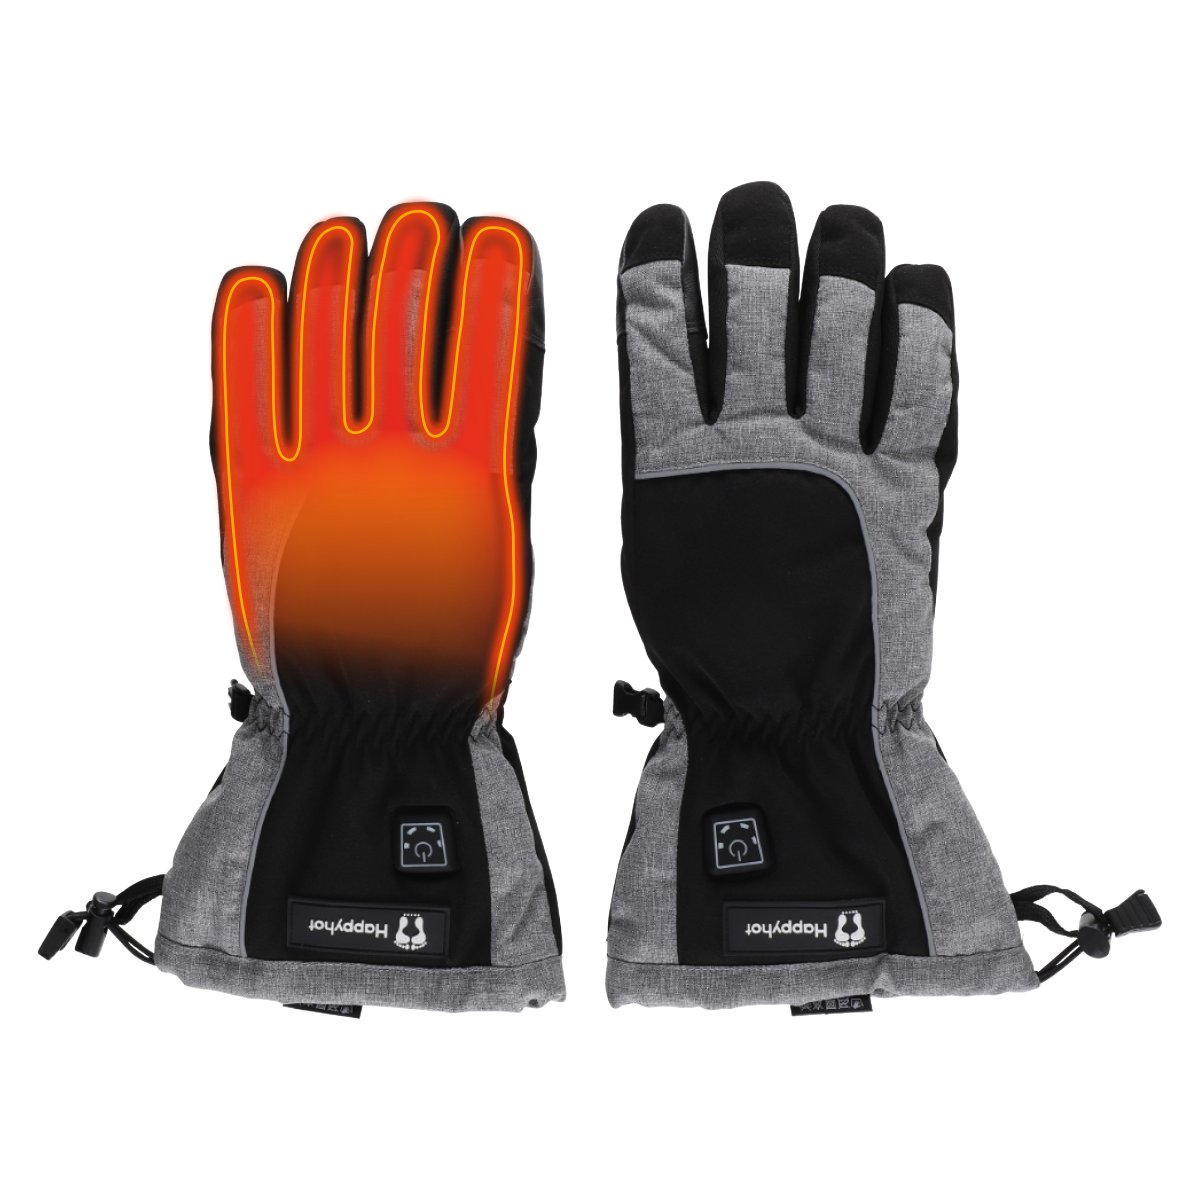 2Pcs 3 Levels Battery-operated Heated Gloves Battery Warmer Gloves Skiing Riding 